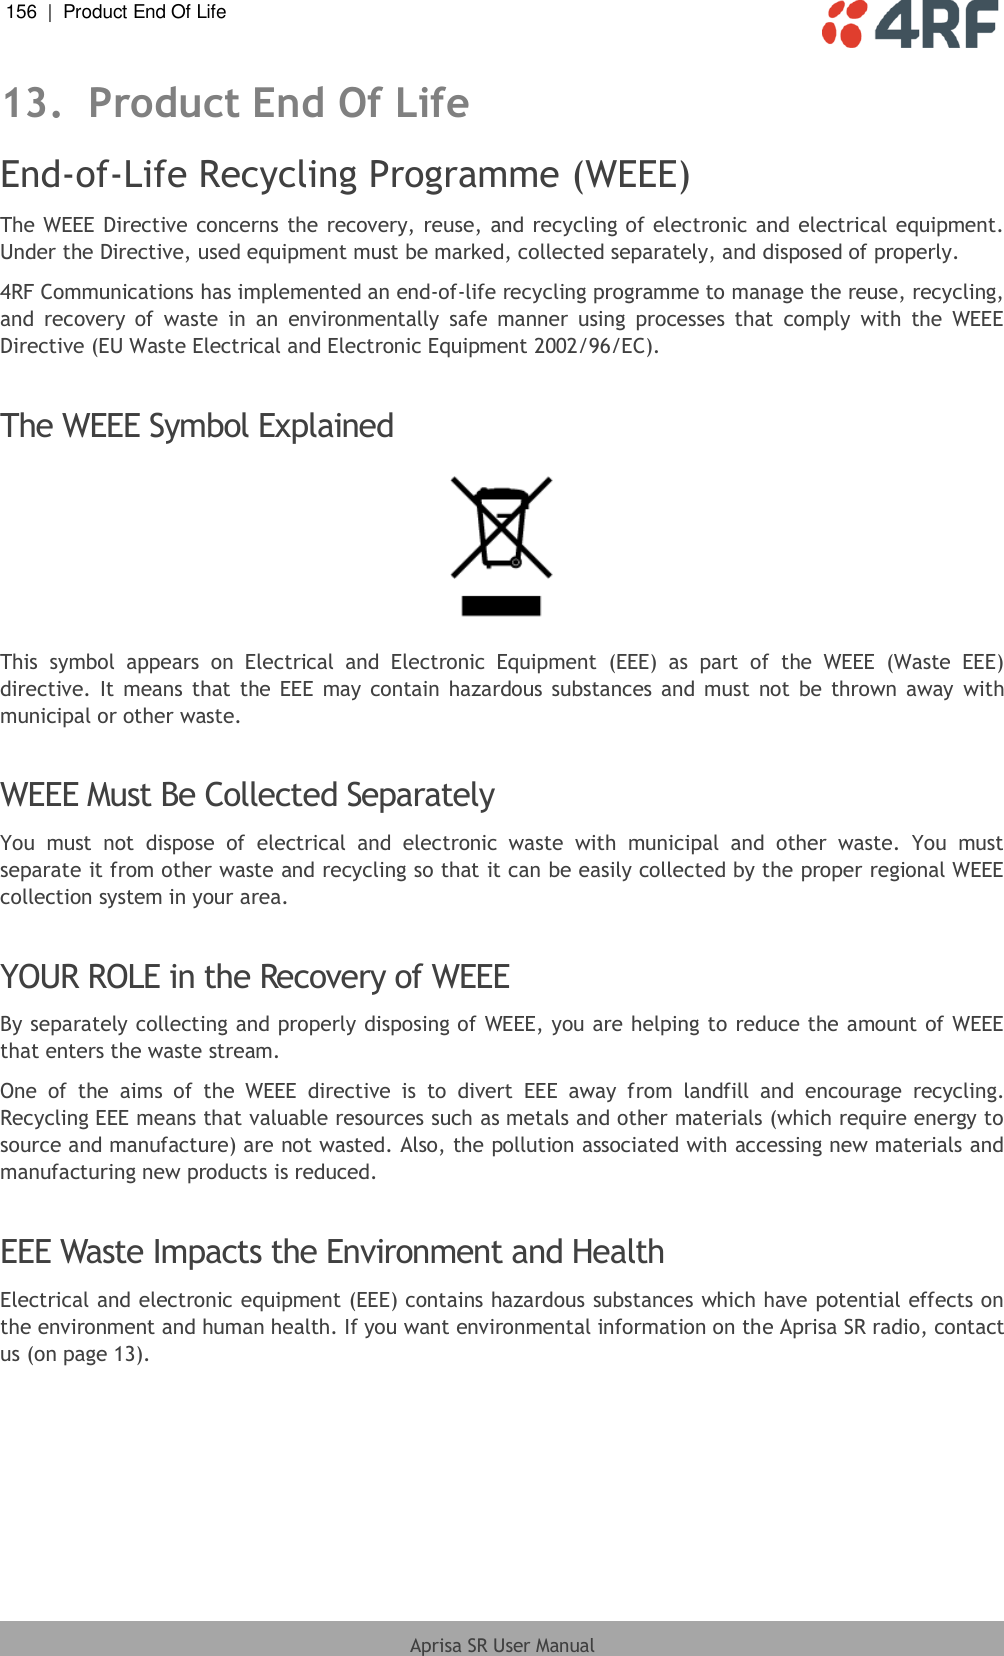 156  |  Product End Of Life   Aprisa SR User Manual  13. Product End Of Life End-of-Life Recycling Programme (WEEE) The WEEE Directive concerns the recovery, reuse, and recycling of electronic and electrical equipment. Under the Directive, used equipment must be marked, collected separately, and disposed of properly. 4RF Communications has implemented an end-of-life recycling programme to manage the reuse, recycling, and  recovery  of  waste  in  an  environmentally  safe  manner  using  processes  that  comply  with  the  WEEE Directive (EU Waste Electrical and Electronic Equipment 2002/96/EC).  The WEEE Symbol Explained  This  symbol  appears  on  Electrical  and  Electronic  Equipment  (EEE)  as  part  of  the  WEEE  (Waste  EEE) directive. It  means that the EEE  may contain hazardous  substances  and  must  not be  thrown away  with municipal or other waste.  WEEE Must Be Collected Separately You  must  not  dispose  of  electrical  and  electronic  waste  with  municipal  and  other  waste.  You  must separate it from other waste and recycling so that it can be easily collected by the proper regional WEEE collection system in your area.  YOUR ROLE in the Recovery of WEEE By separately collecting and properly disposing of WEEE, you are helping to reduce the amount of WEEE that enters the waste stream. One  of  the  aims  of  the  WEEE  directive  is  to  divert  EEE  away  from  landfill  and  encourage  recycling. Recycling EEE means that valuable resources such as metals and other materials (which require energy to source and manufacture) are not wasted. Also, the pollution associated with accessing new materials and manufacturing new products is reduced.  EEE Waste Impacts the Environment and Health Electrical and electronic equipment (EEE) contains hazardous substances which have potential effects on the environment and human health. If you want environmental information on the Aprisa SR radio, contact us (on page 13).  